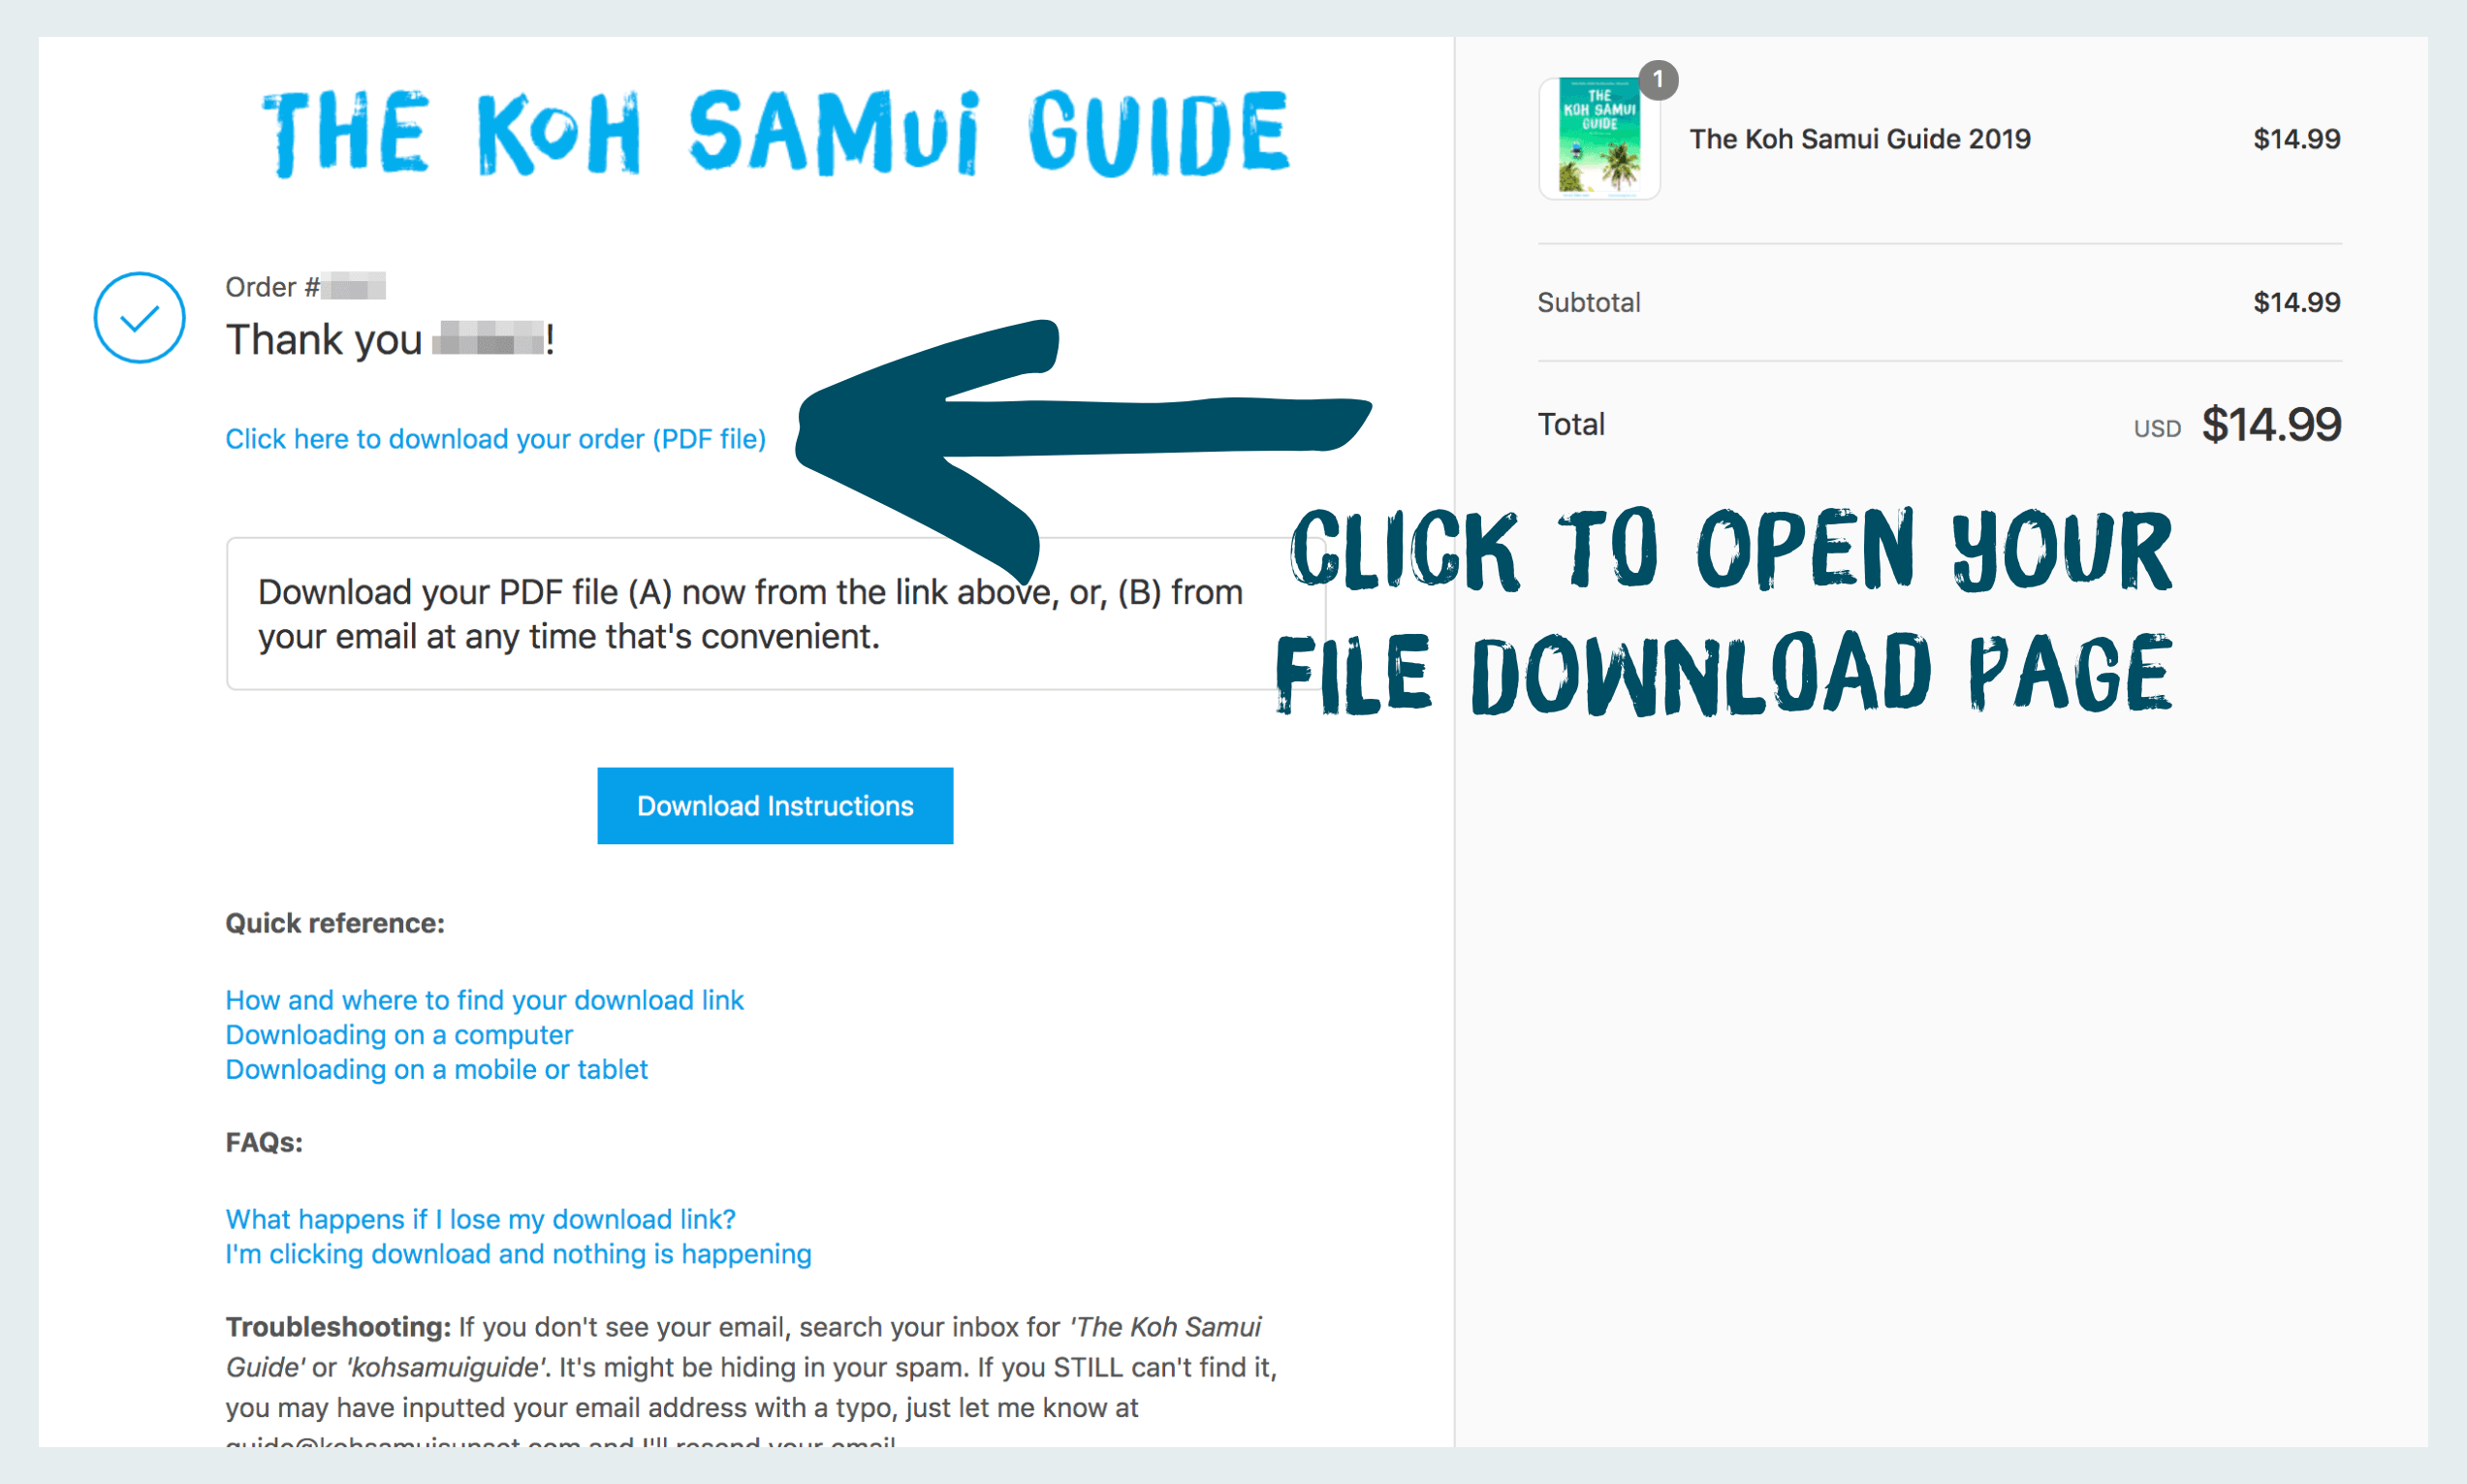 How to download The Koh Samui Guide: Your post-purchase webpage with your download link